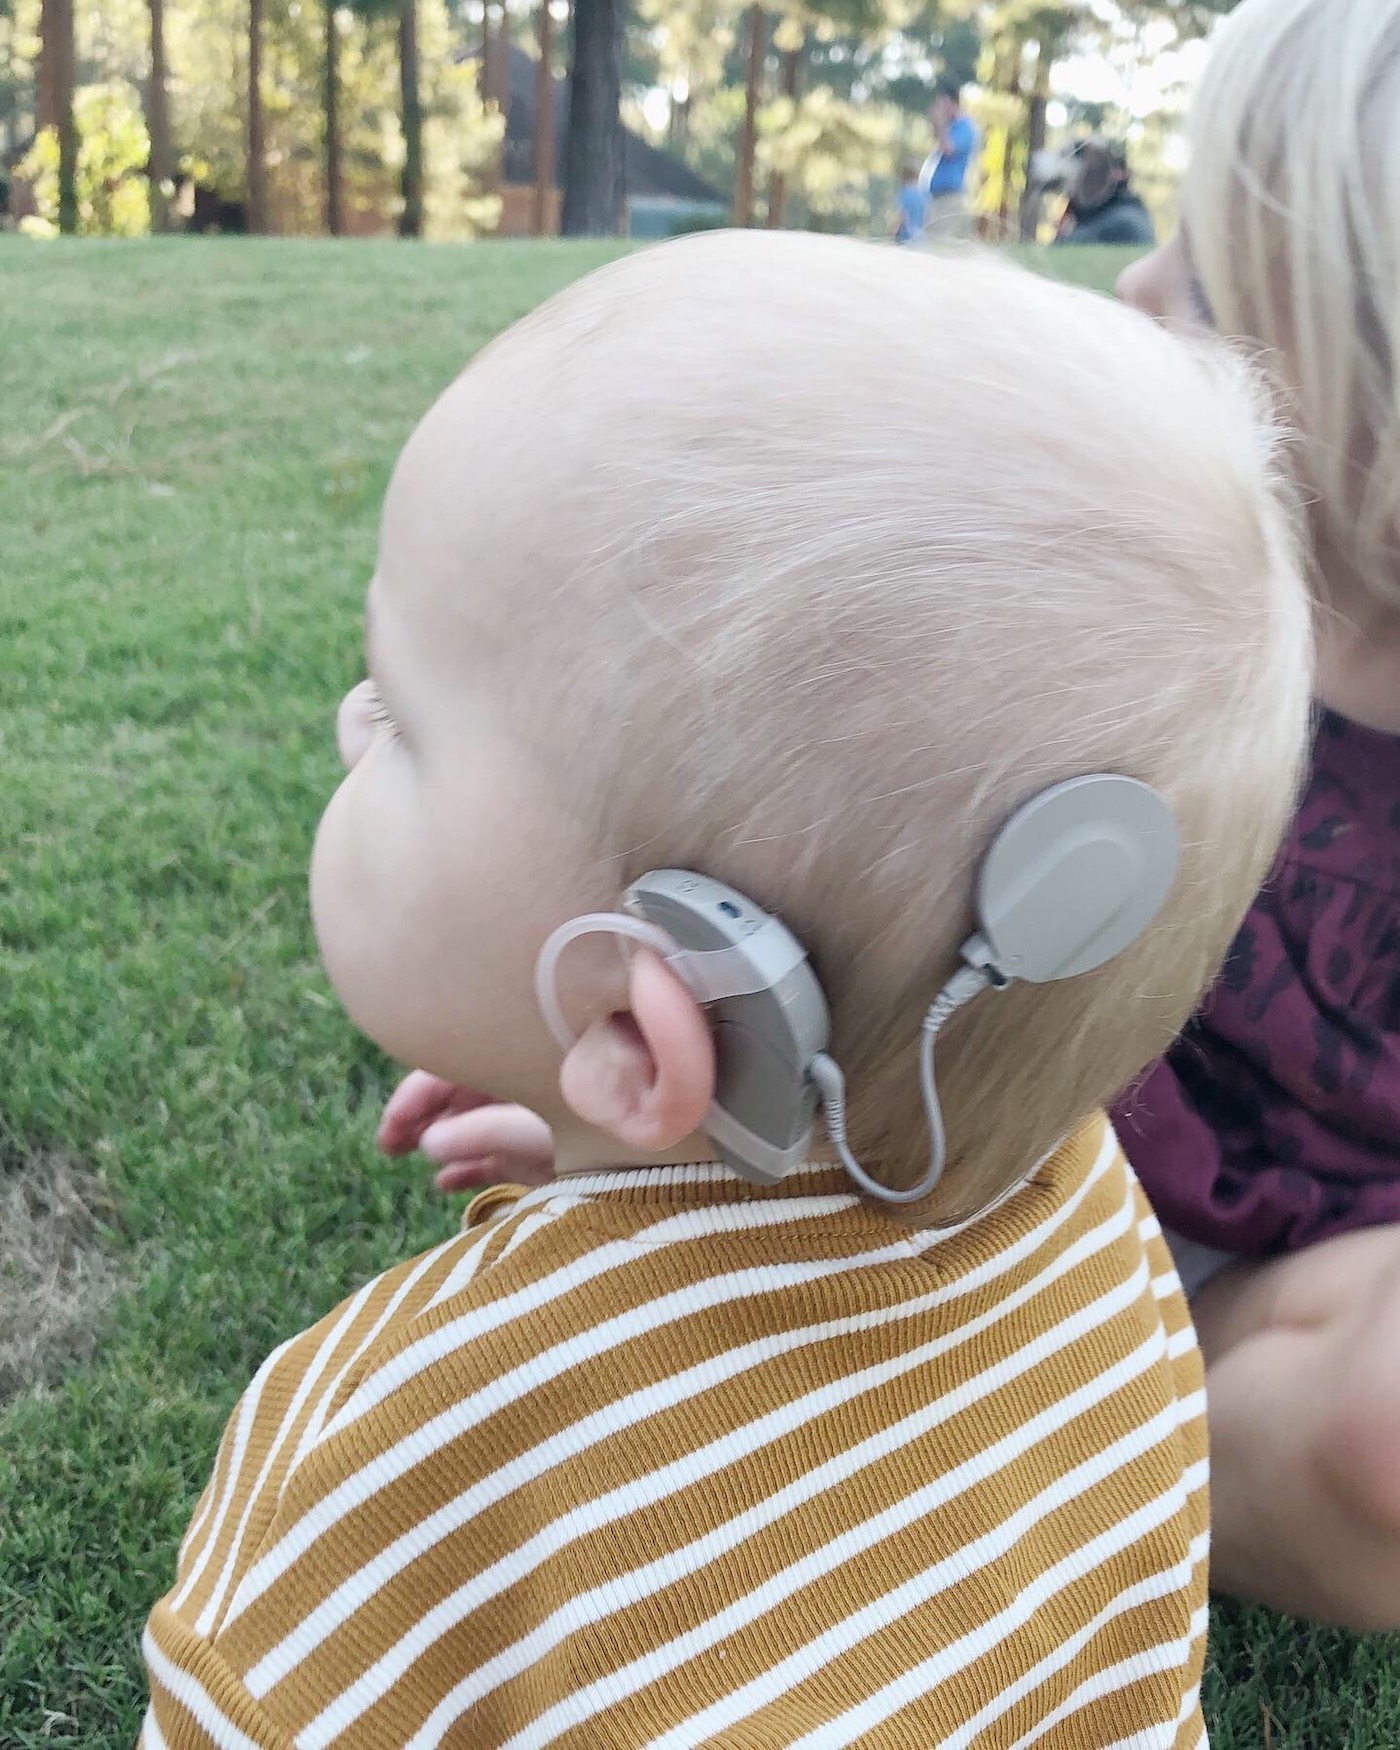 Dempsey's Cochlear Implants are ON! Activation Day + FAQs